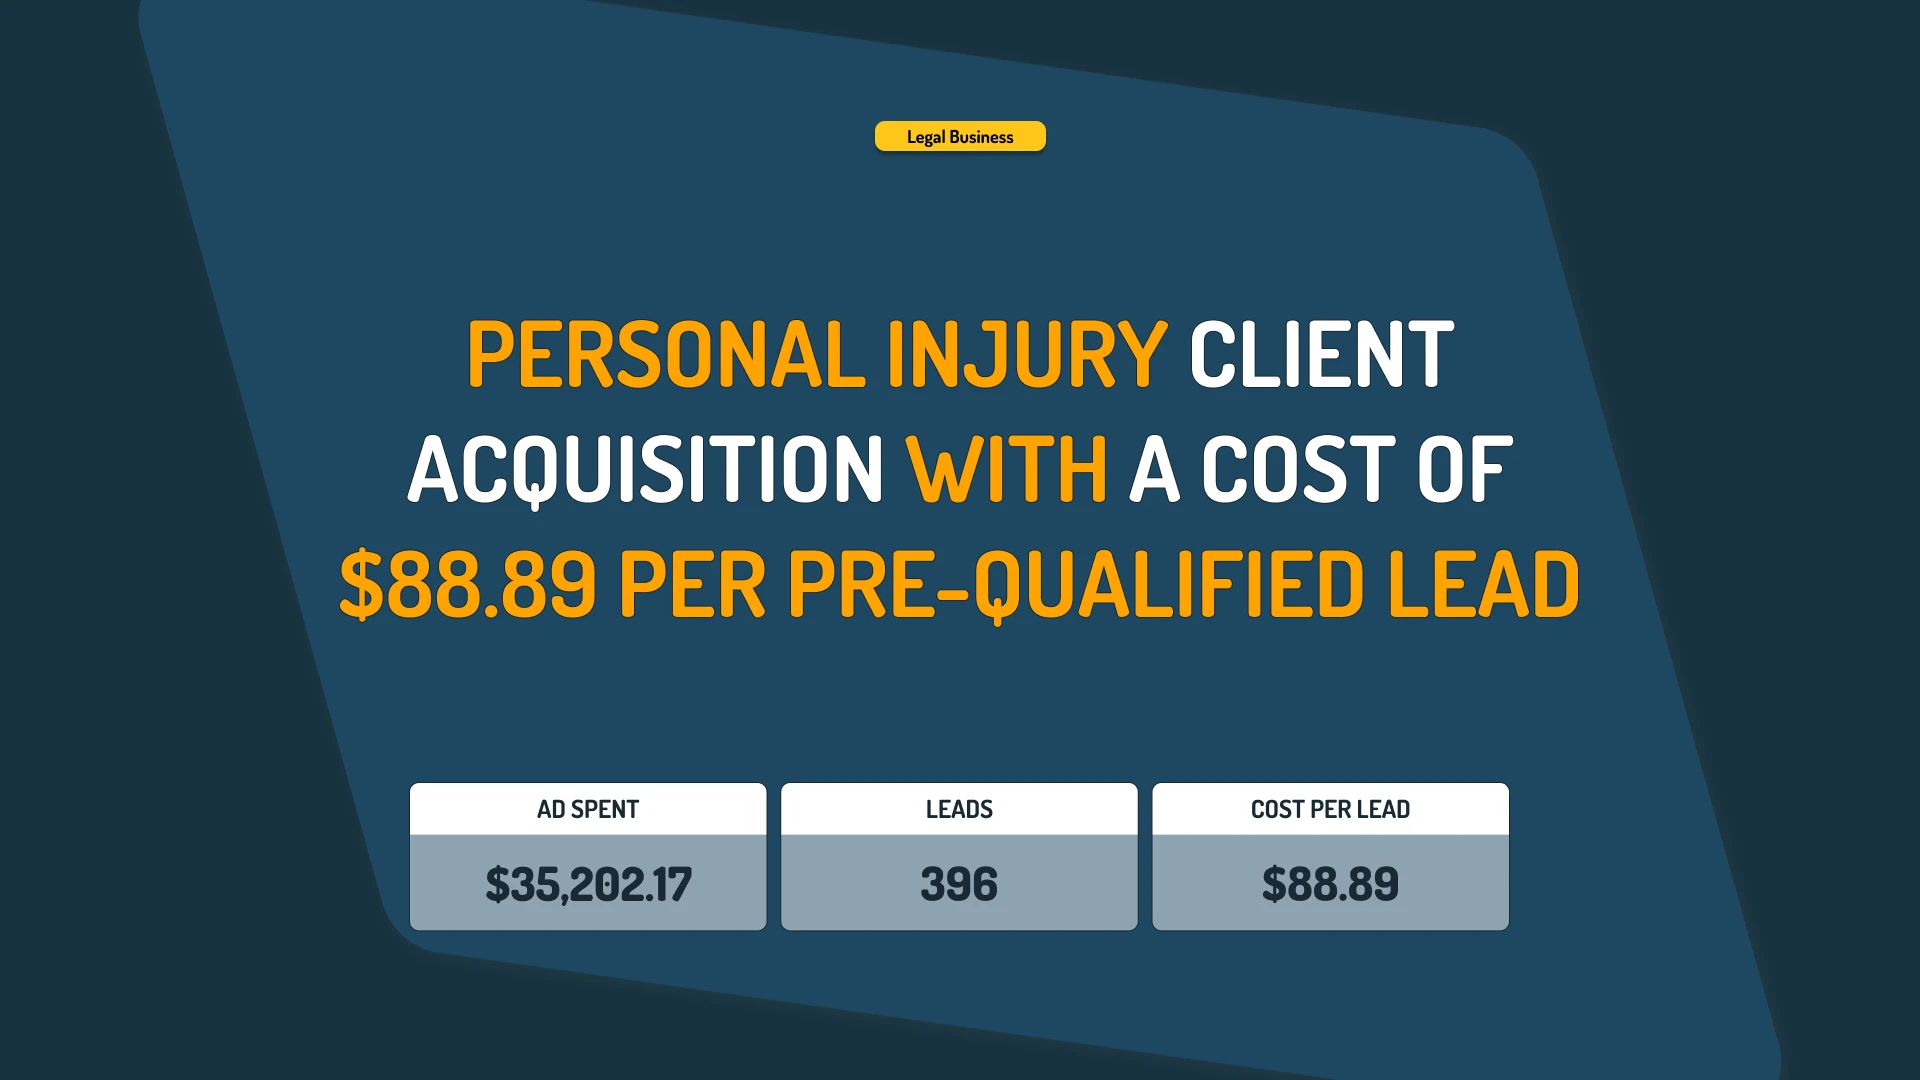 Personal injury: client acquisition with a cost of $89 per lead